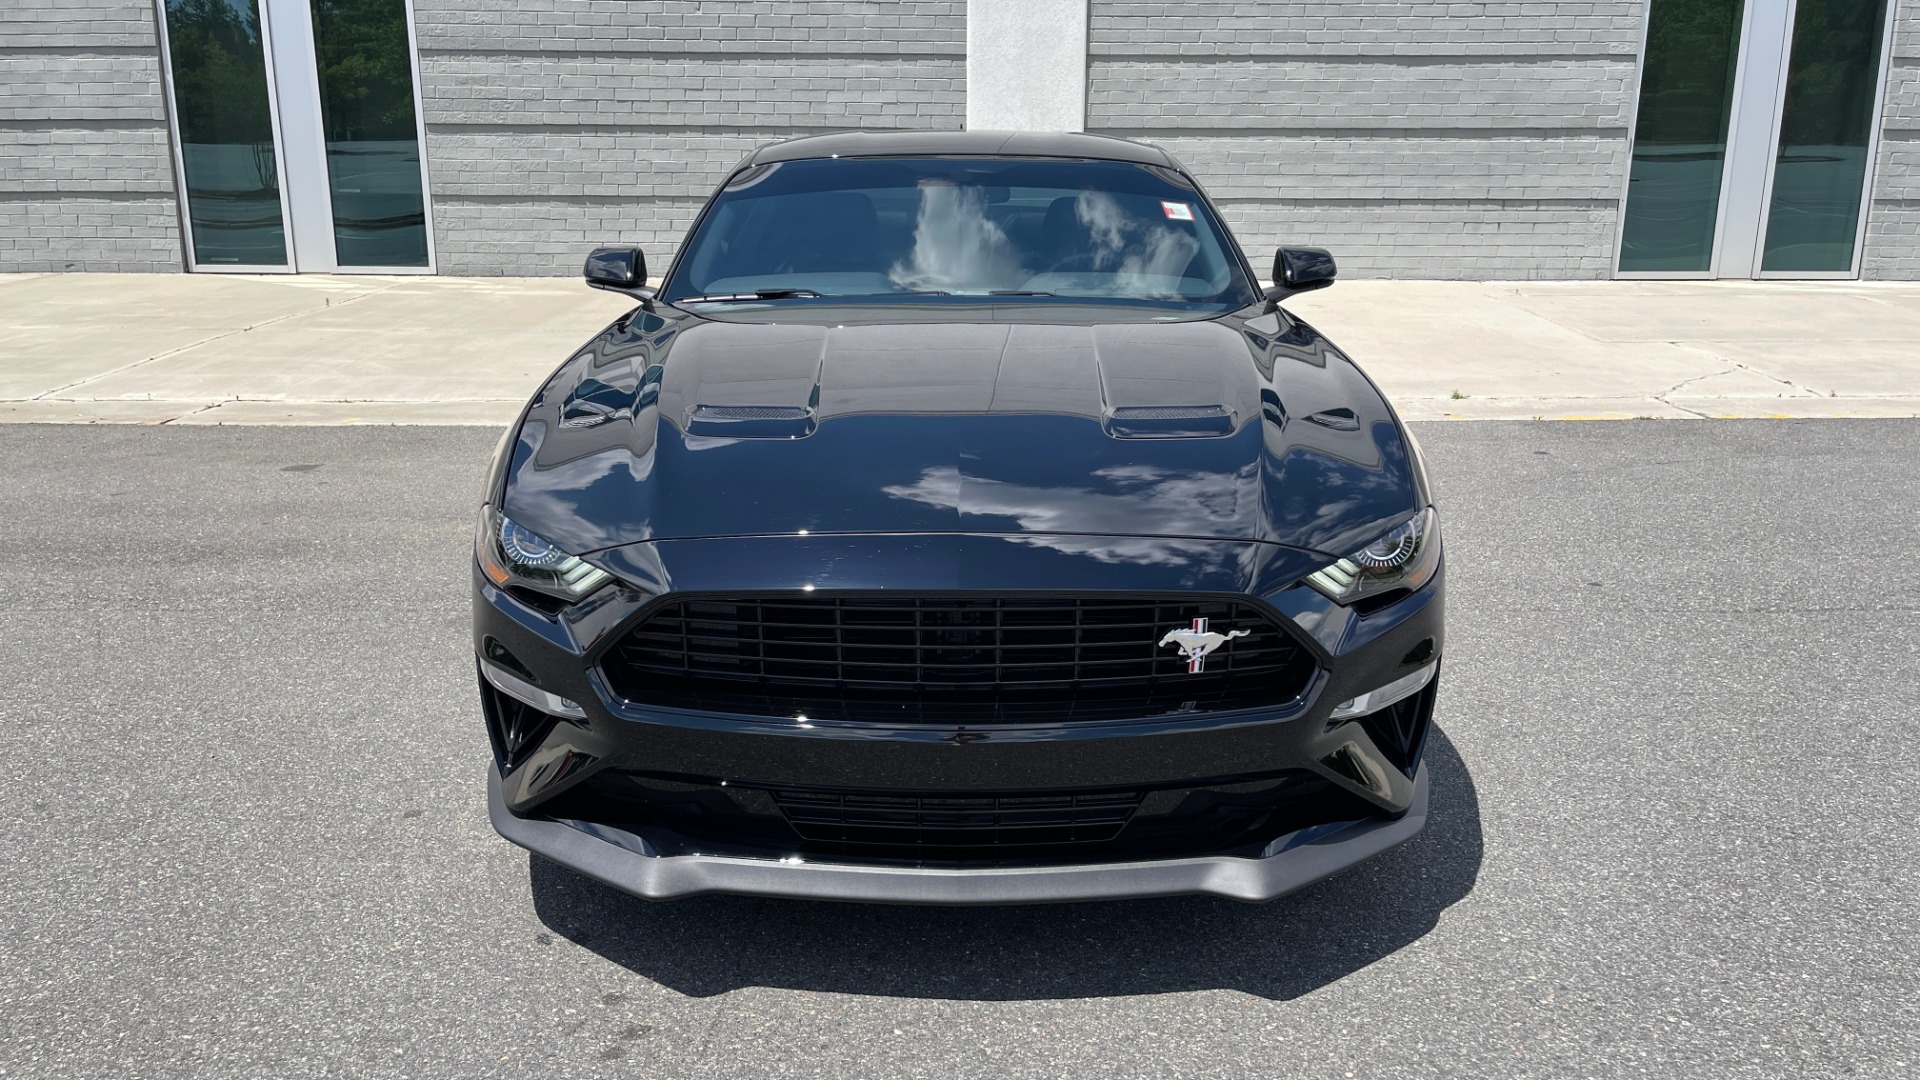 Used 2020 Ford MUSTANG GT PREMIUM / CALIFORNIA SPECIAL / 5.0L V8 / 6-SPD MAN for sale Sold at Formula Imports in Charlotte NC 28227 6